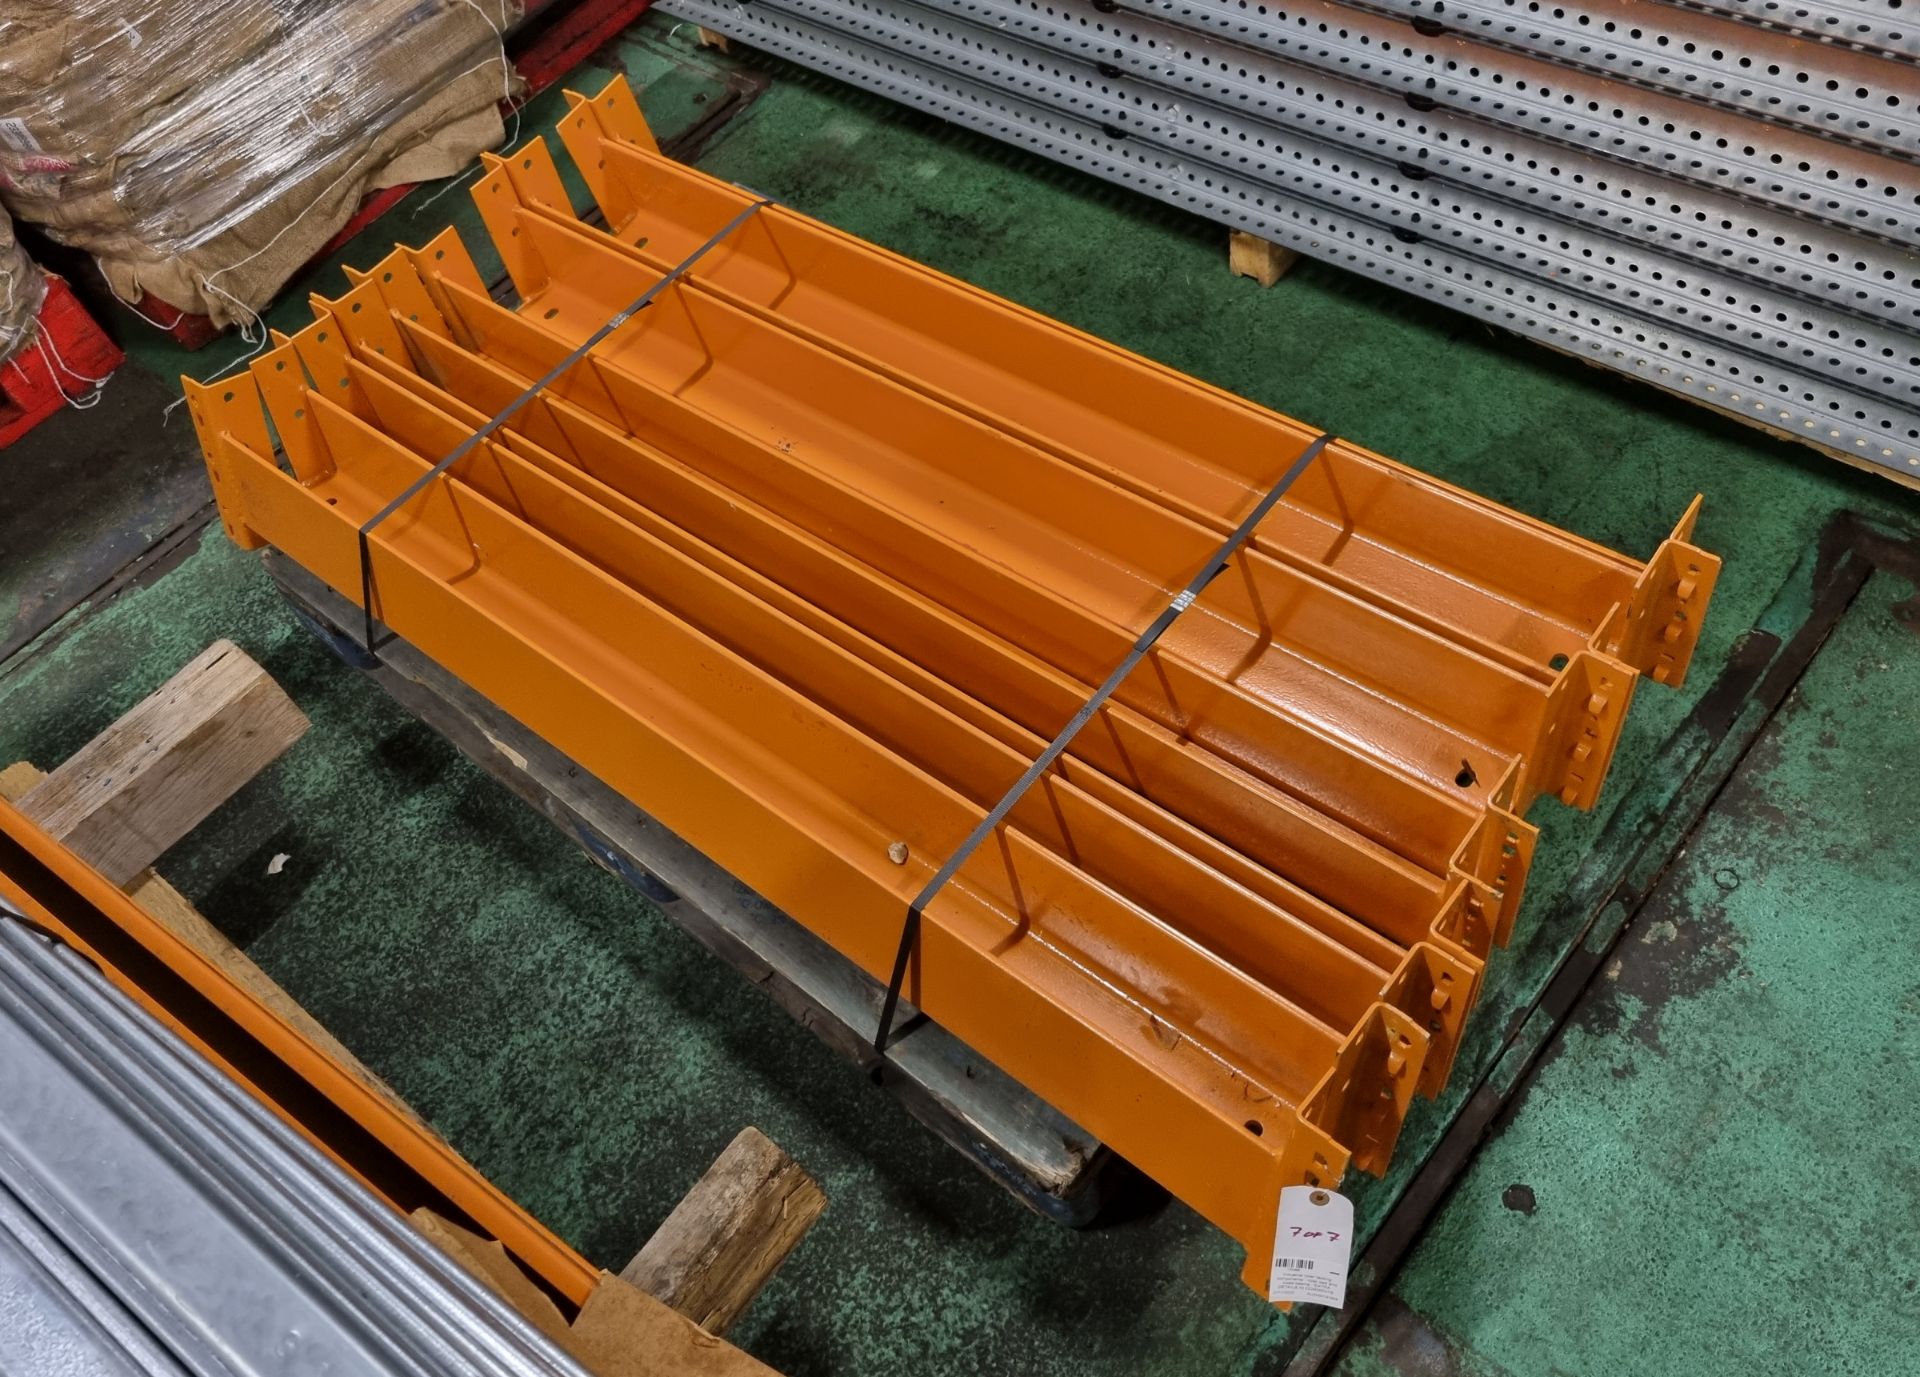 Industrial roller racking components - roller bed and cross beams - see description for details - Image 6 of 8